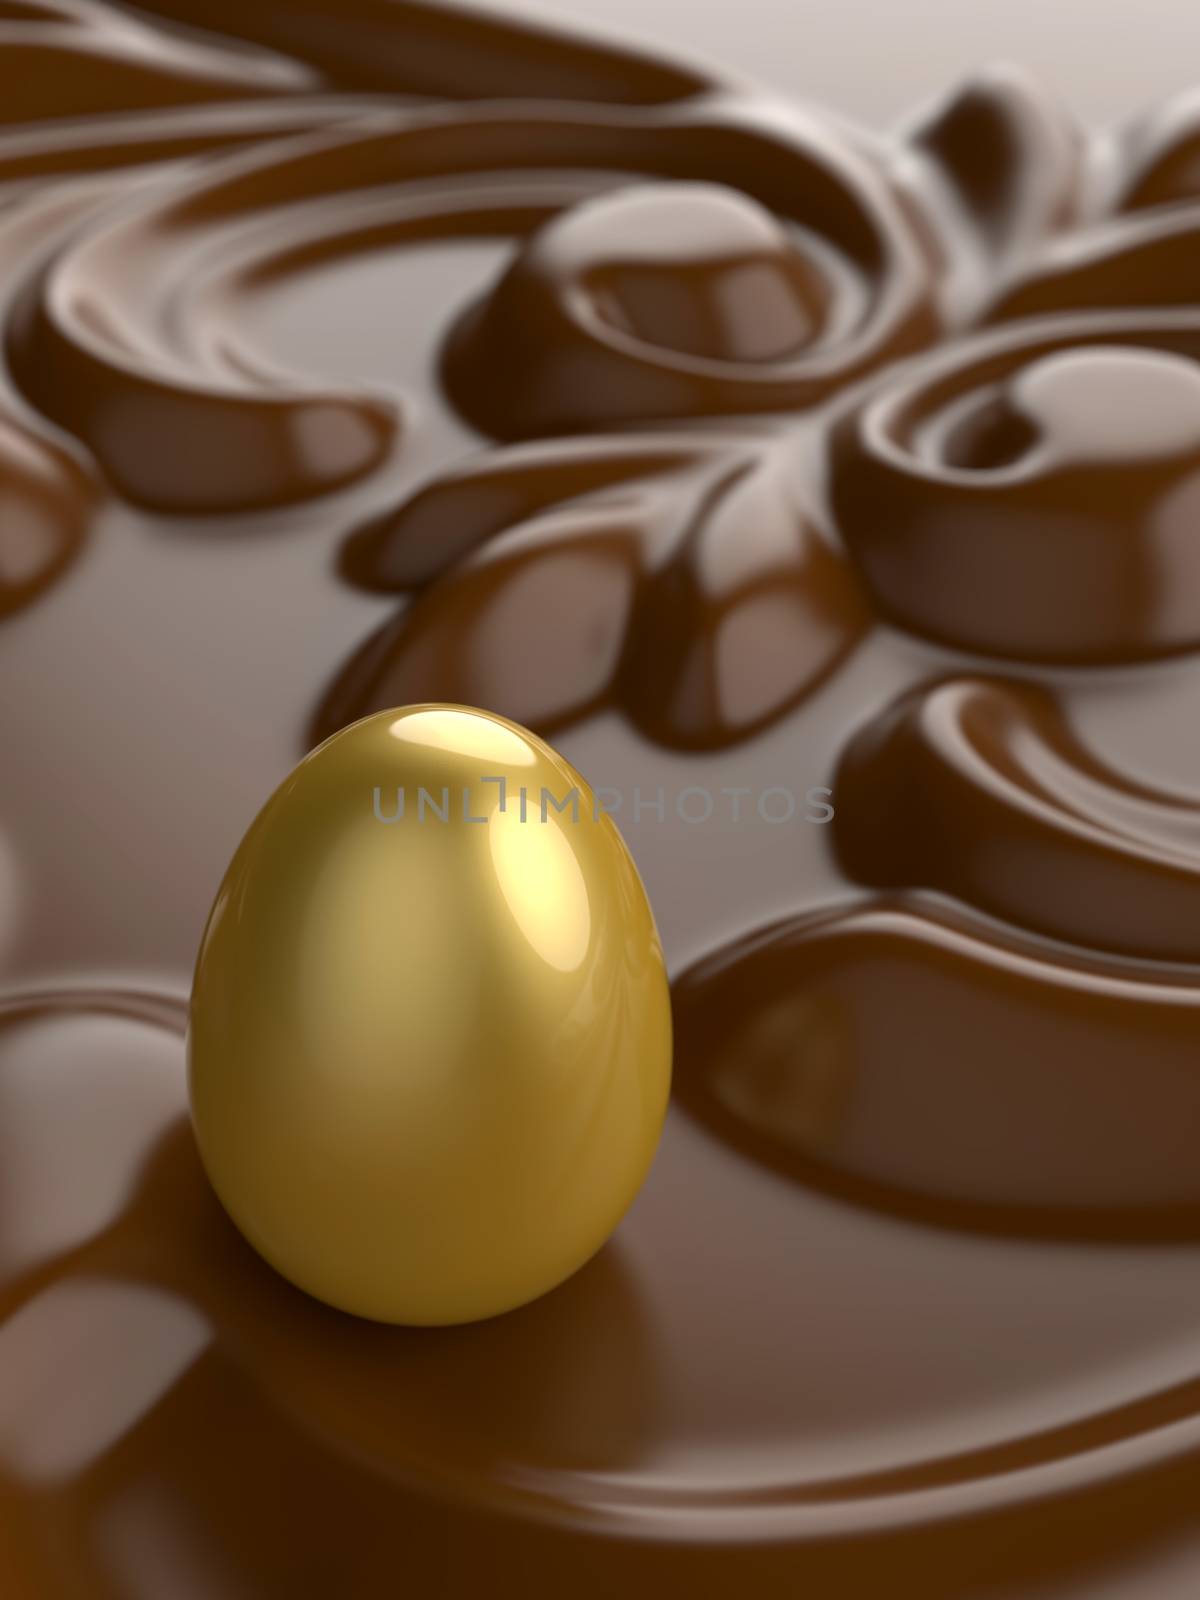 An Easter golden egg with chocolate ornament in front.